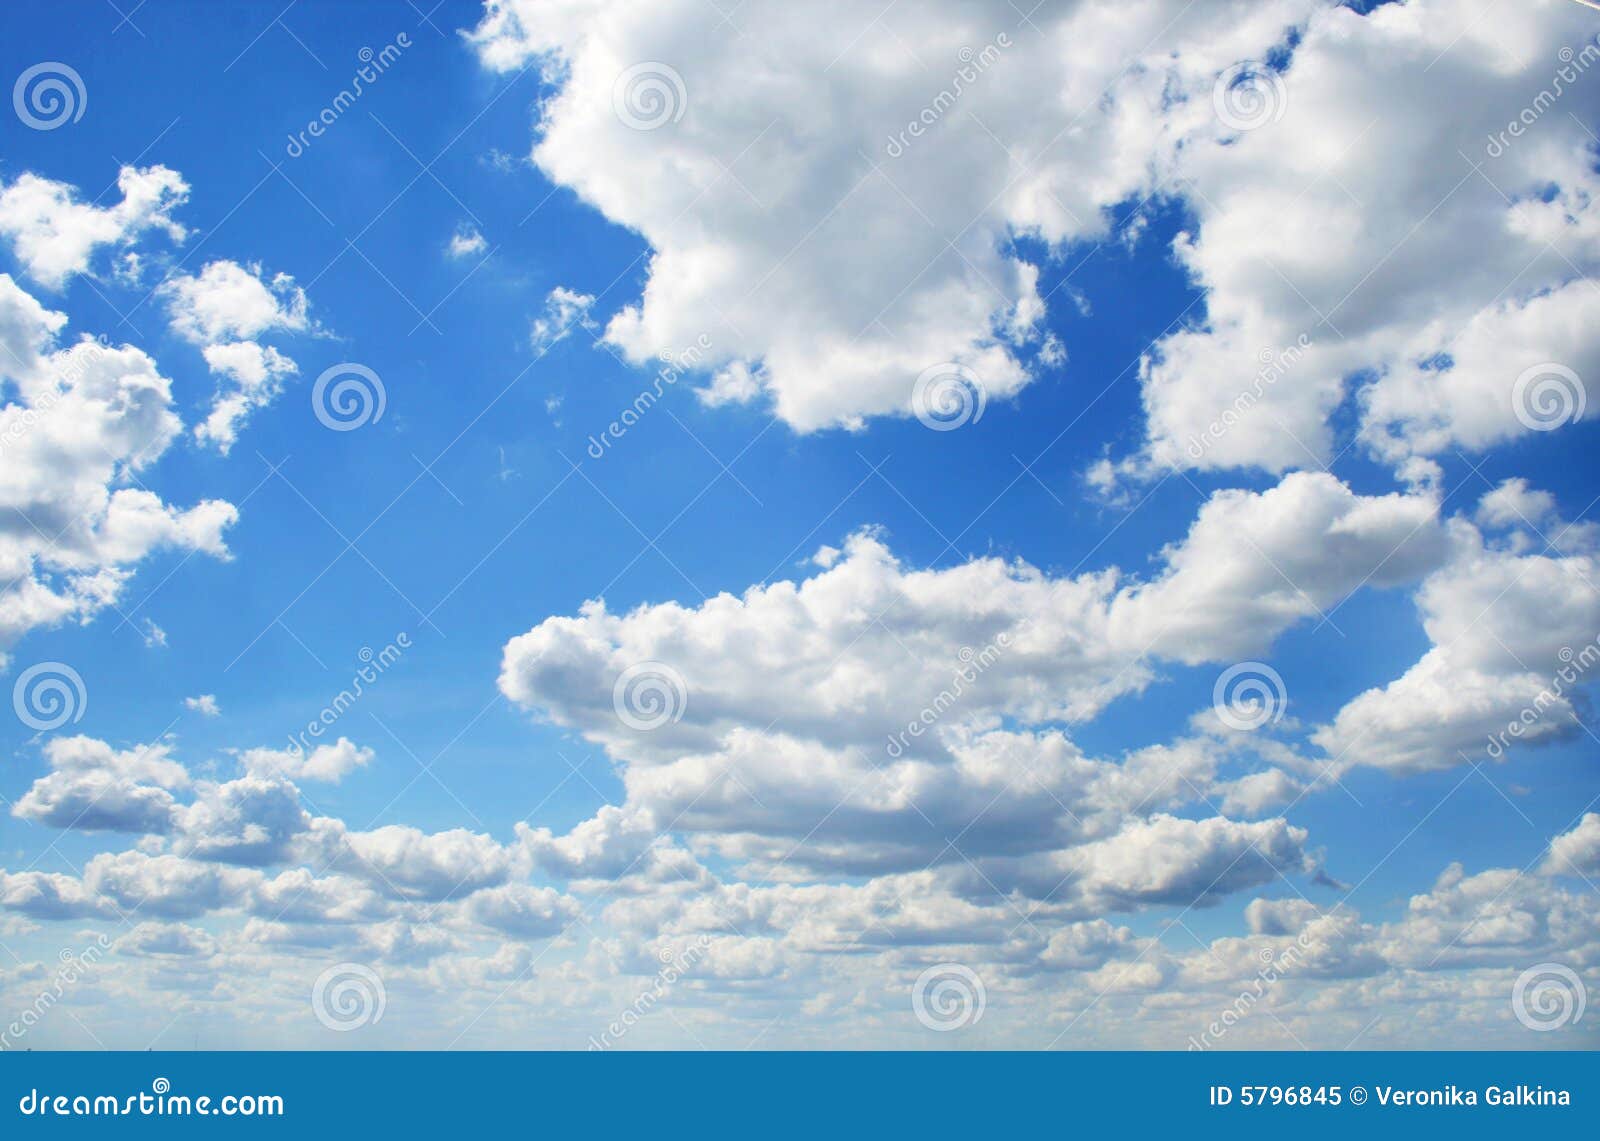 perfect blue cloudy sky